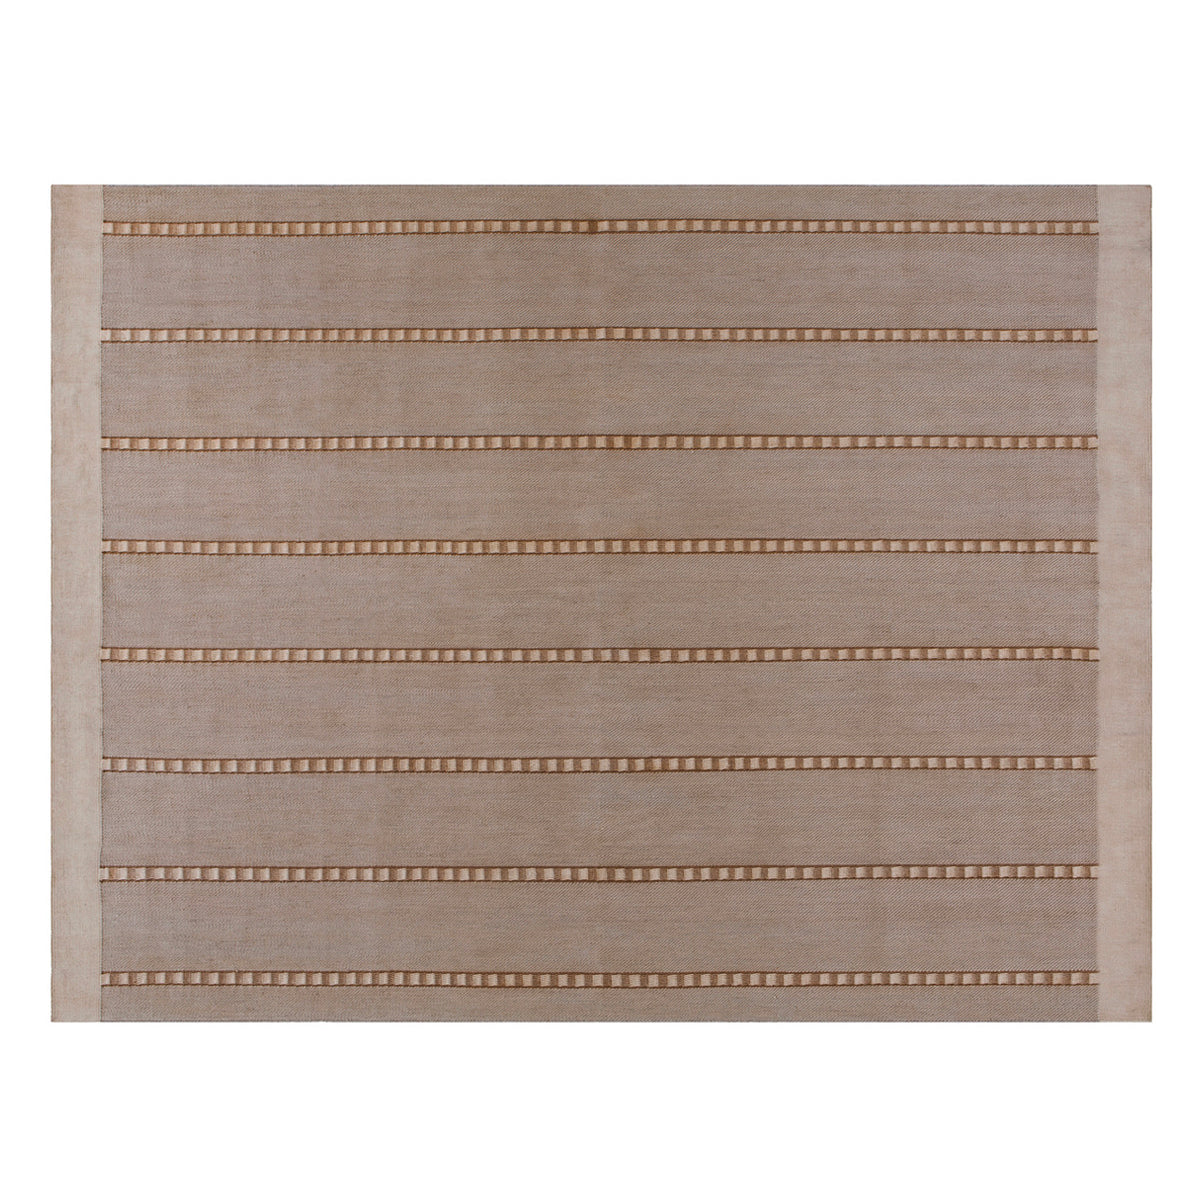 Spice Route White Pepper Rug by Golran | Do Shop